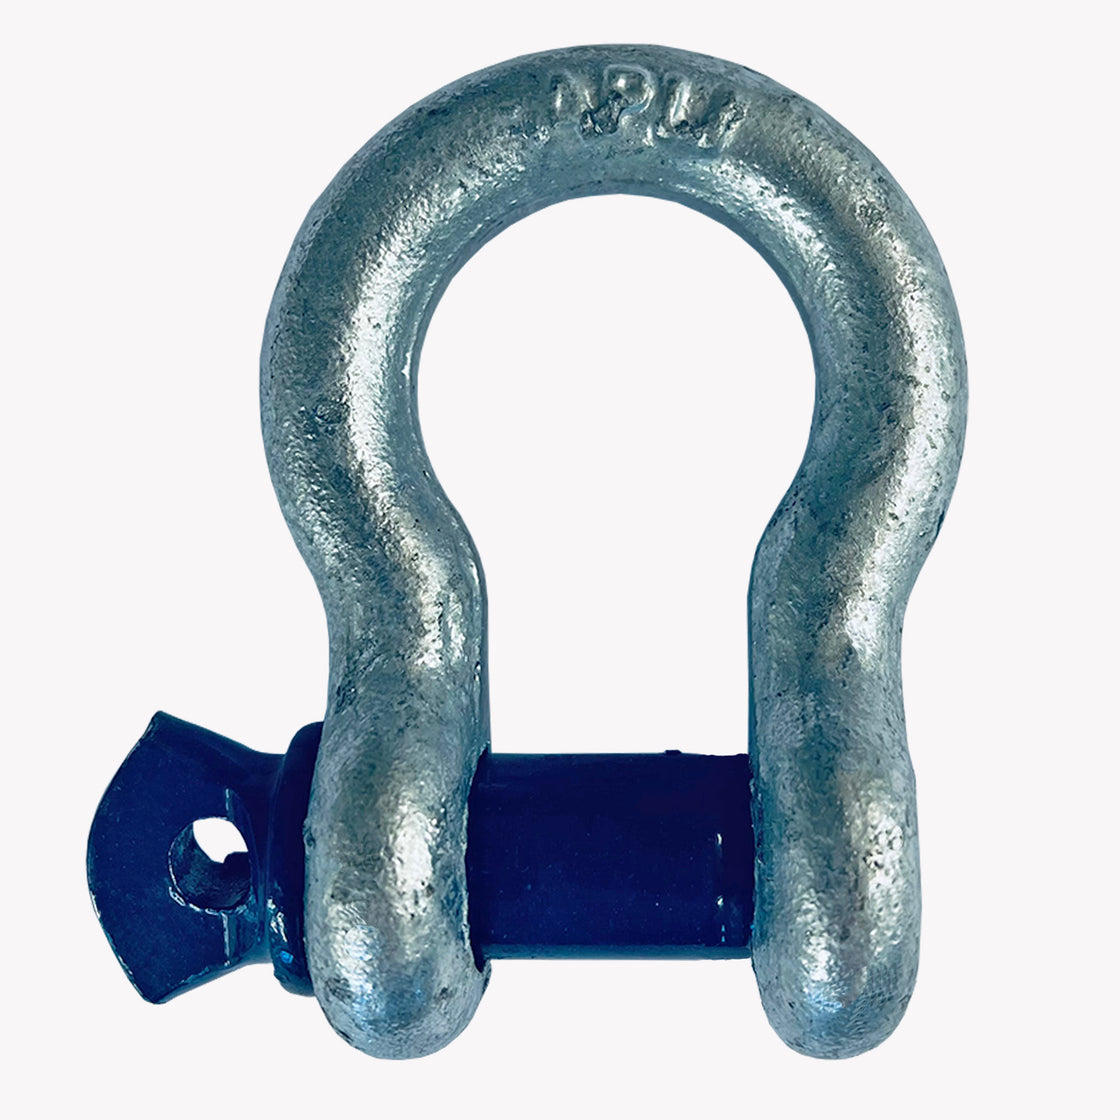 DROP FORGED SCREW PIN BOW SHACKLE - US FEDERAL SPECIFICATION - PGS Supplies 21 Ltd